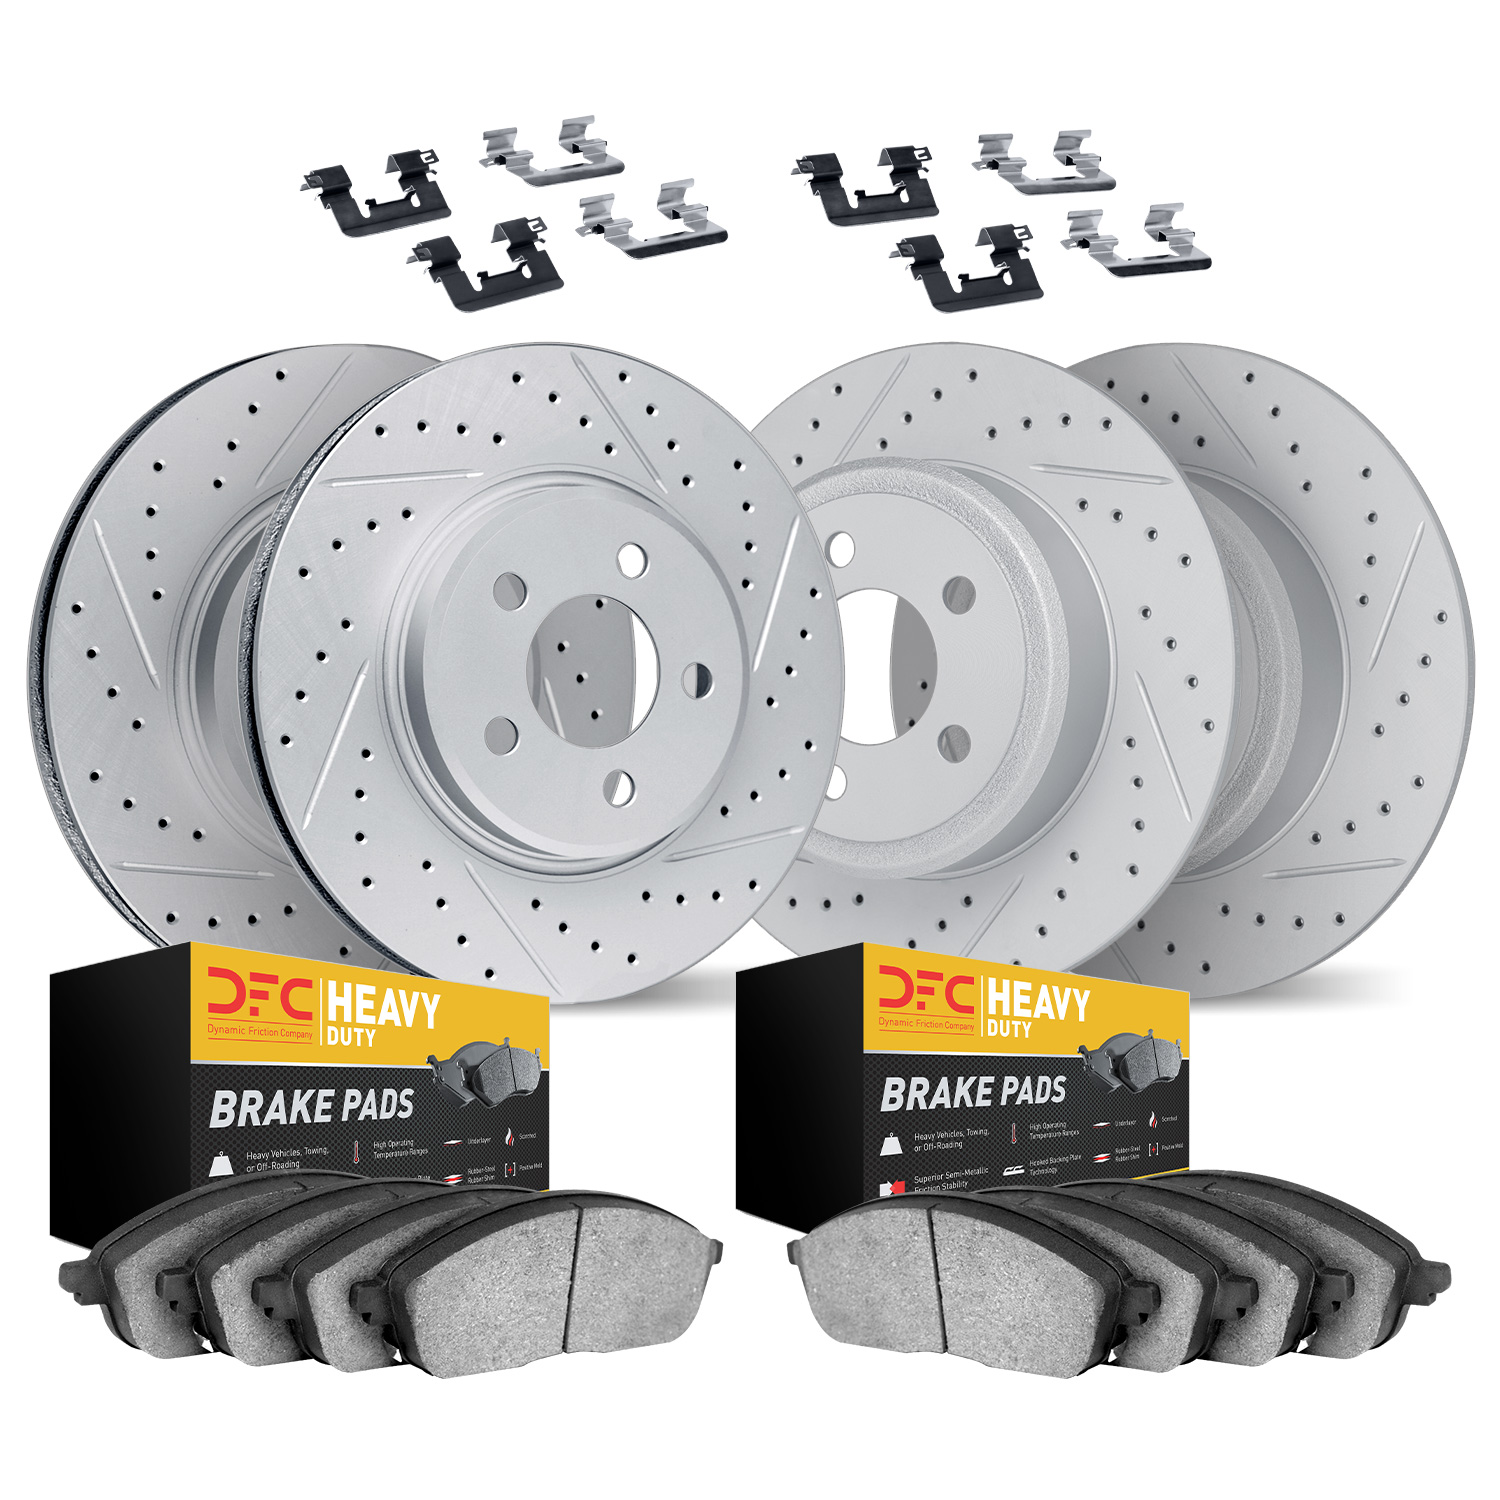 2214-99043 Geoperformance Drilled/Slotted Rotors w/Heavy-Duty Pads Kit & Hardware, 1998-1999 Ford/Lincoln/Mercury/Mazda, Positio